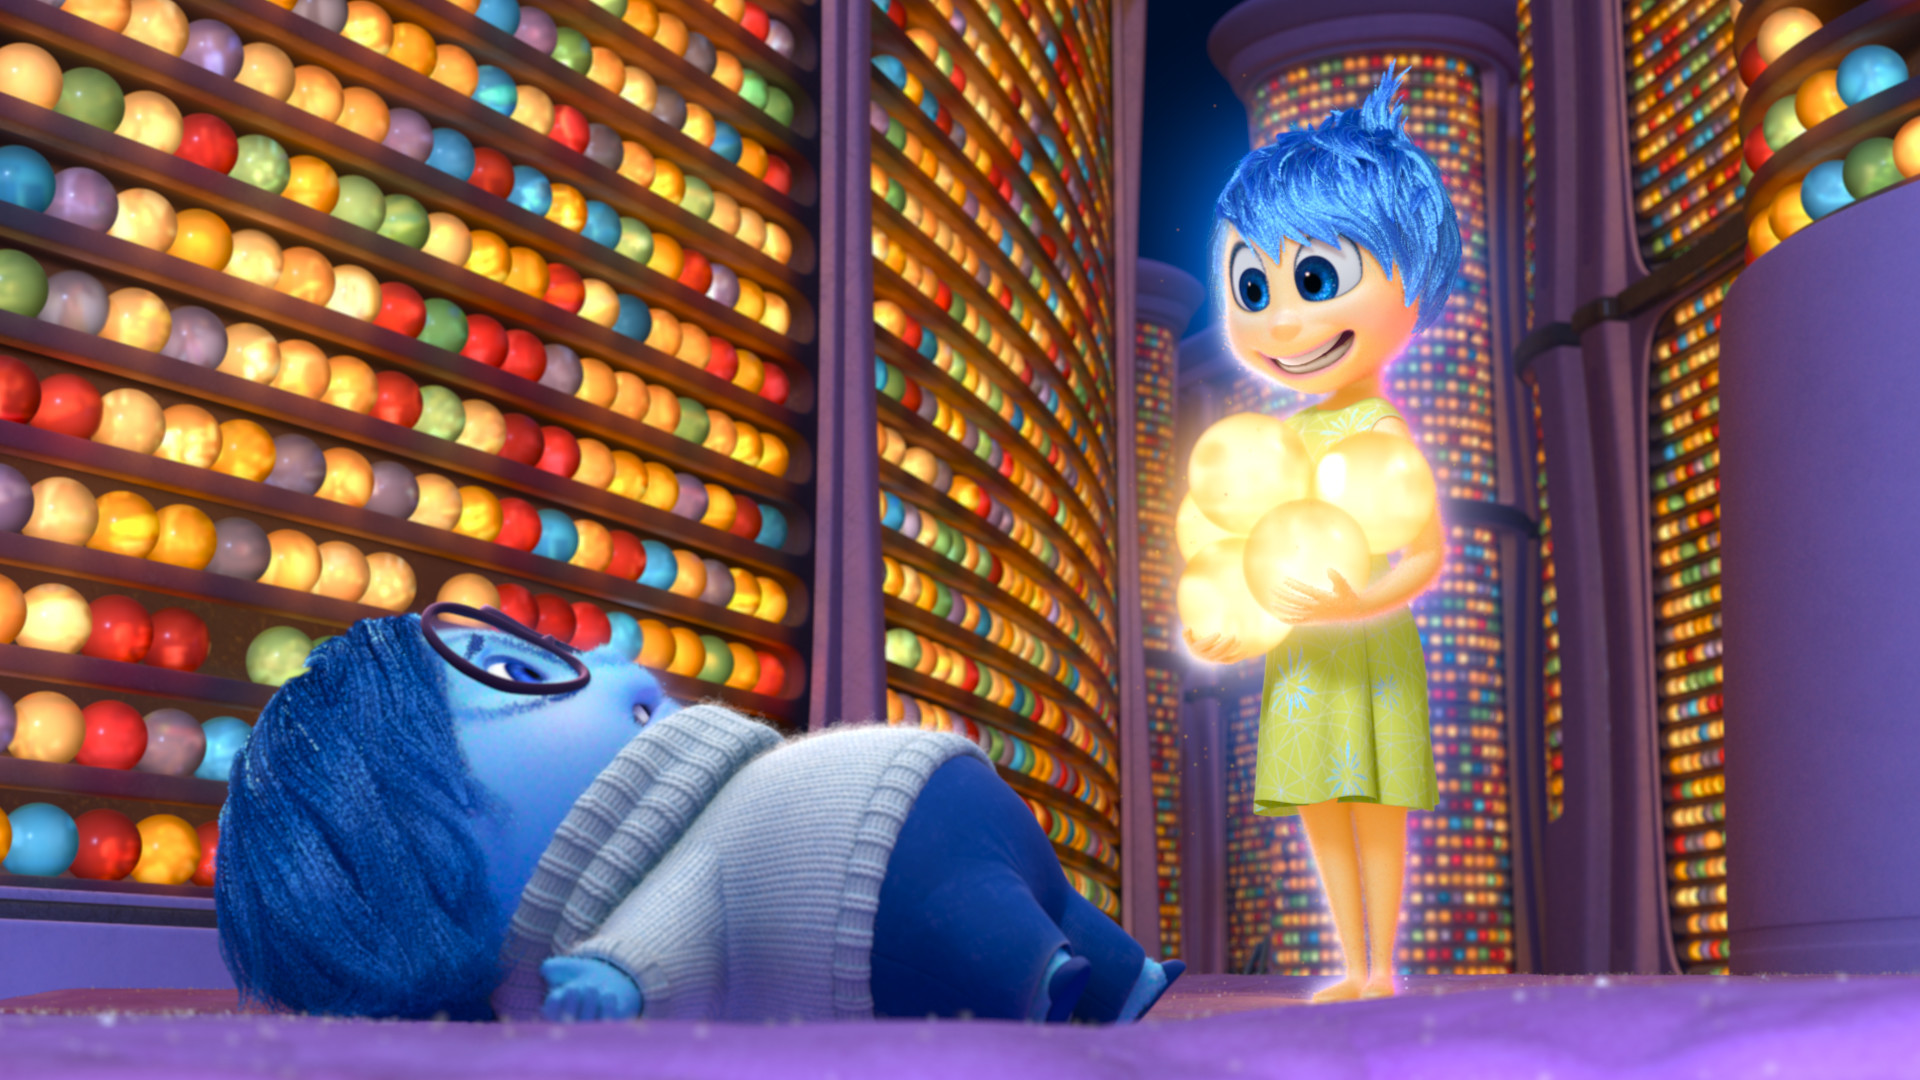 1920x1080 Without Sadness, There Would Be No Joy (A lesson from Pixar's Inside Out)